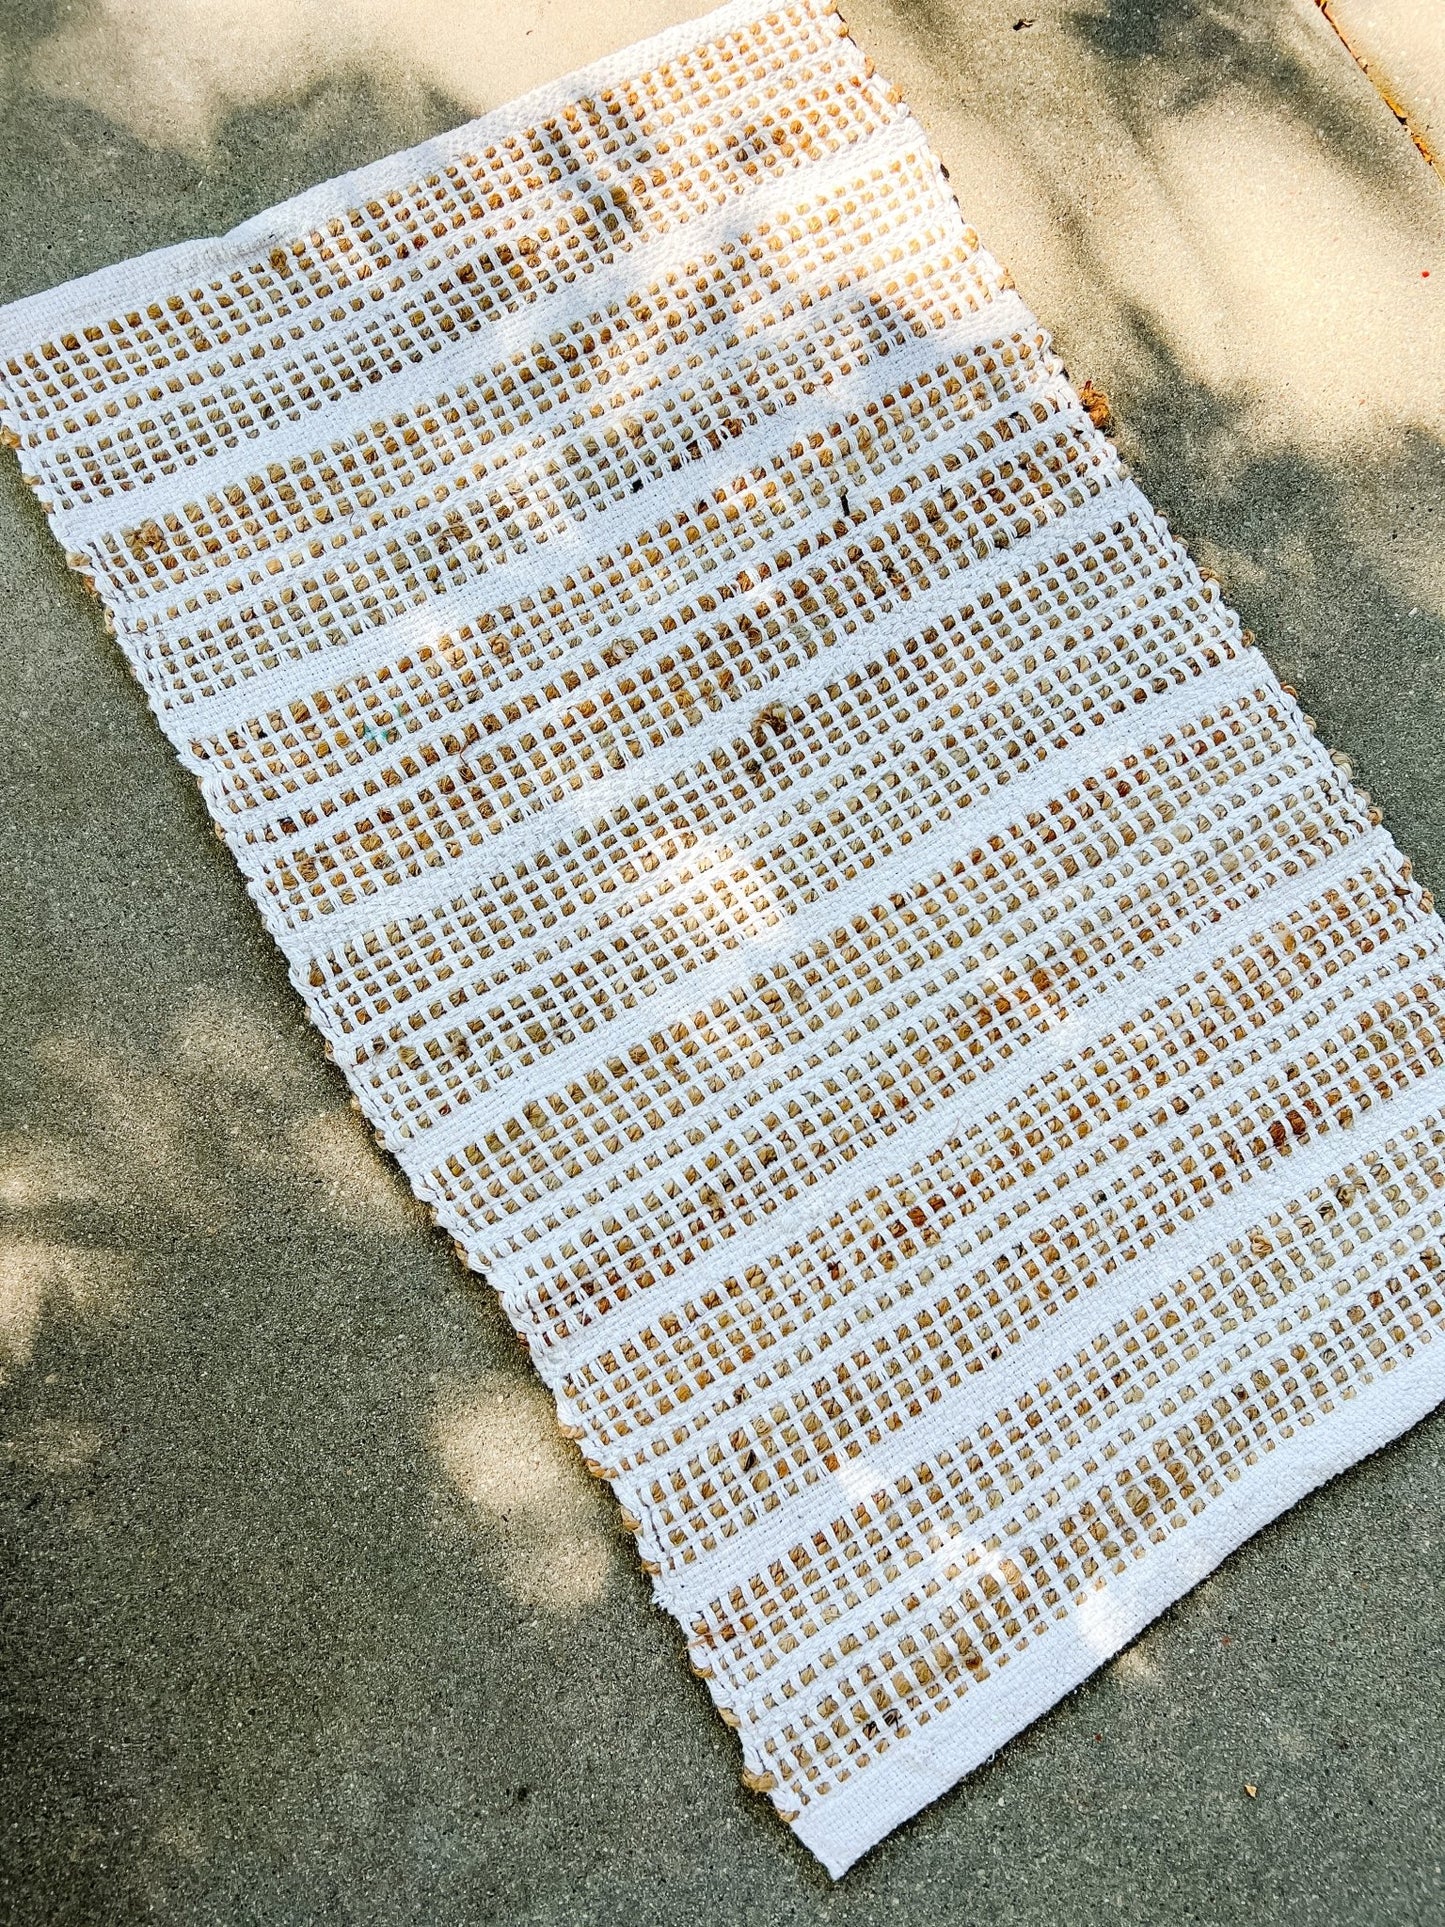 White and Tan Jute - Miss Molly Designs, LLC